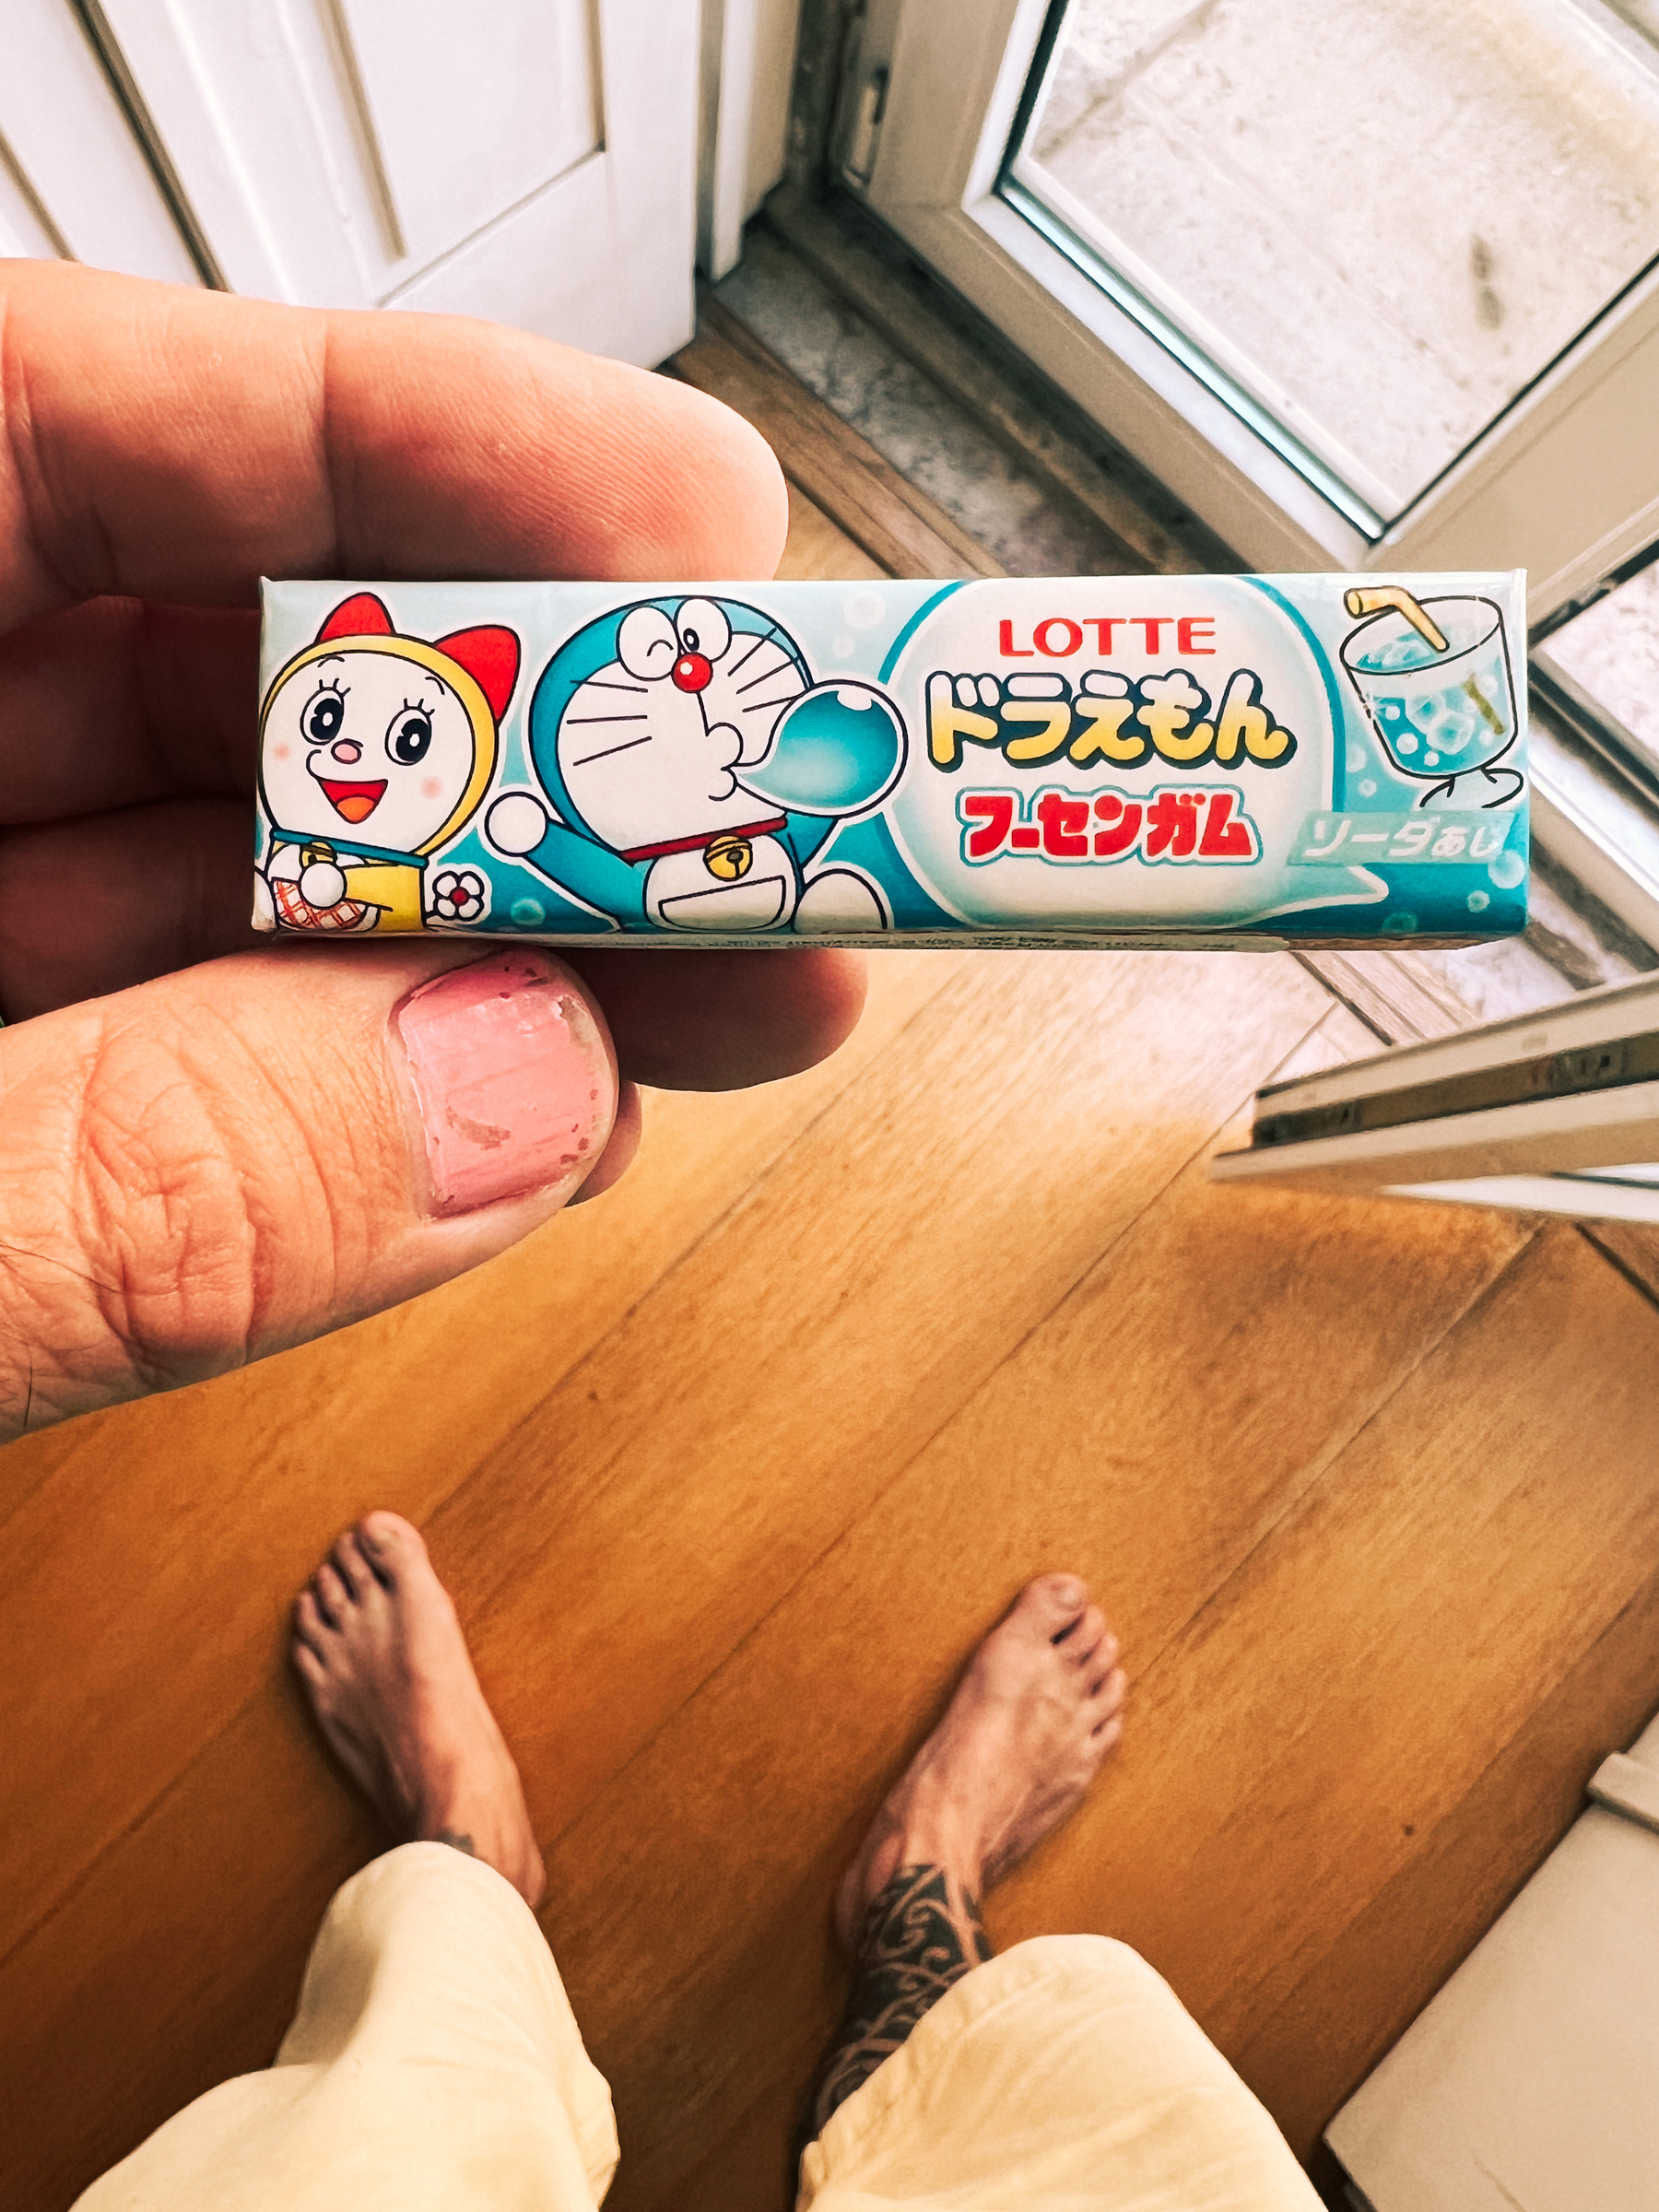 A pack of Doraemon branded chewing gum. 